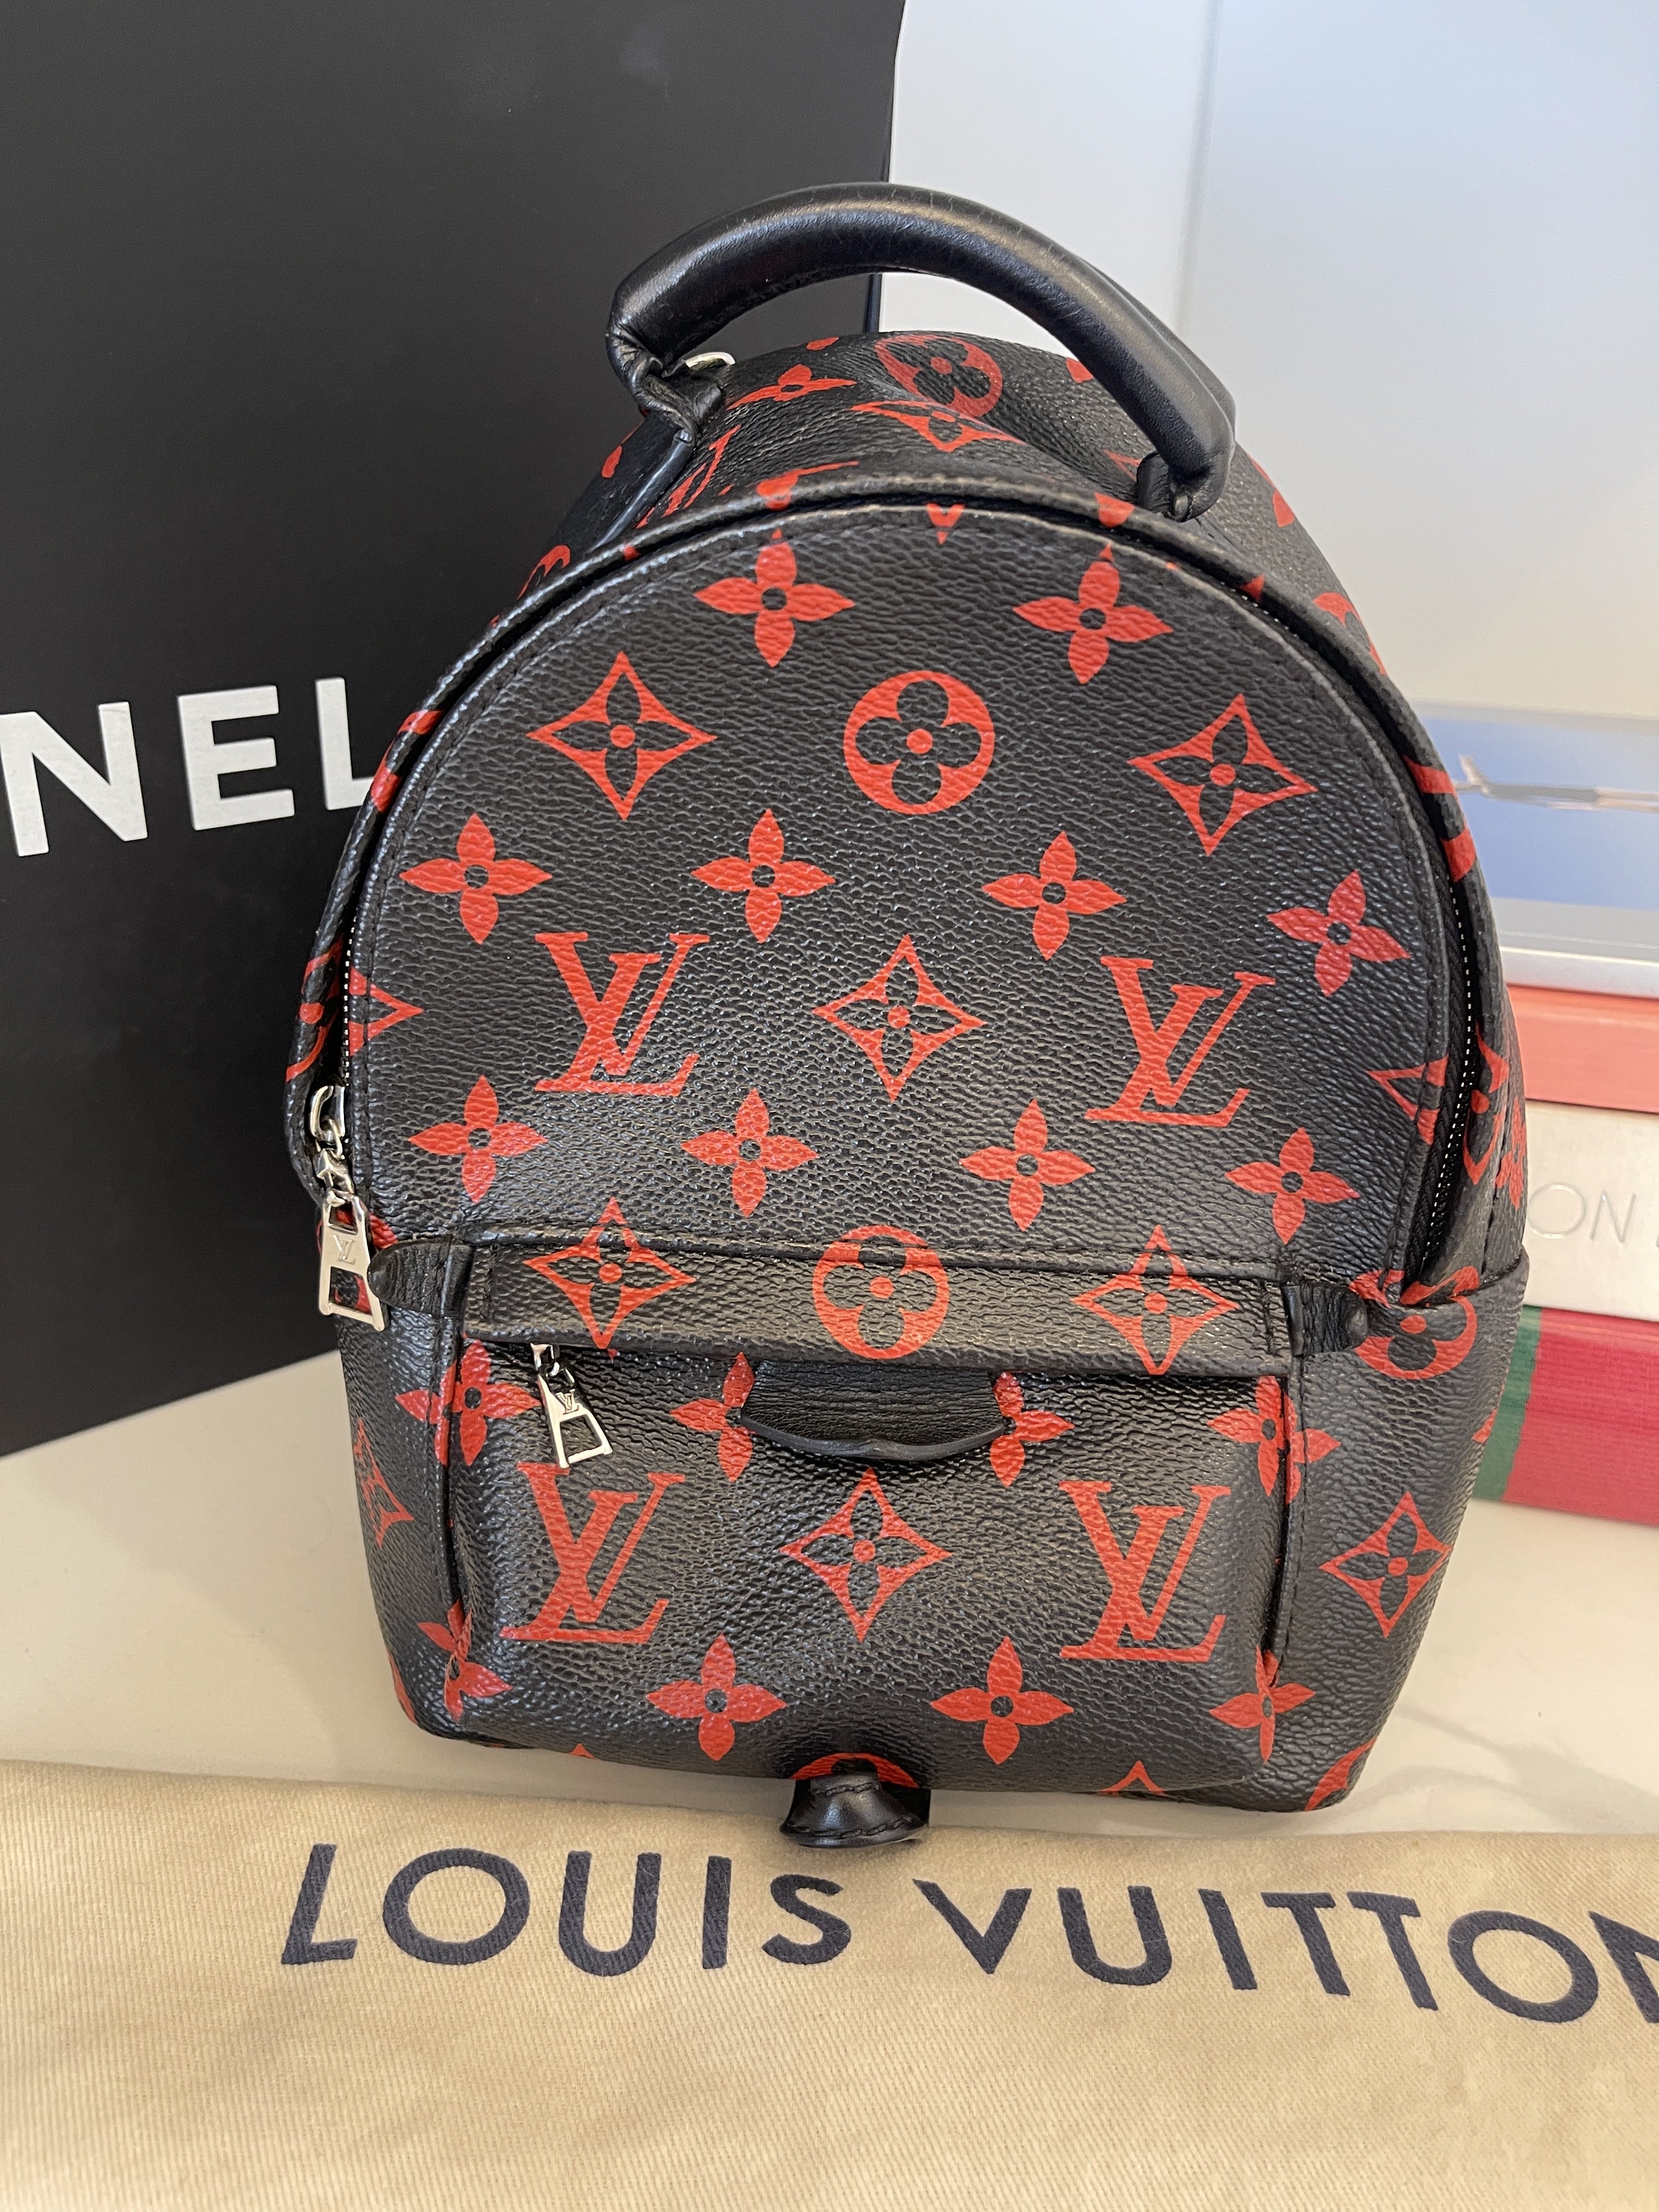 ❌SOLD❌ LV Infrarouge Palm Springs Backpack PM